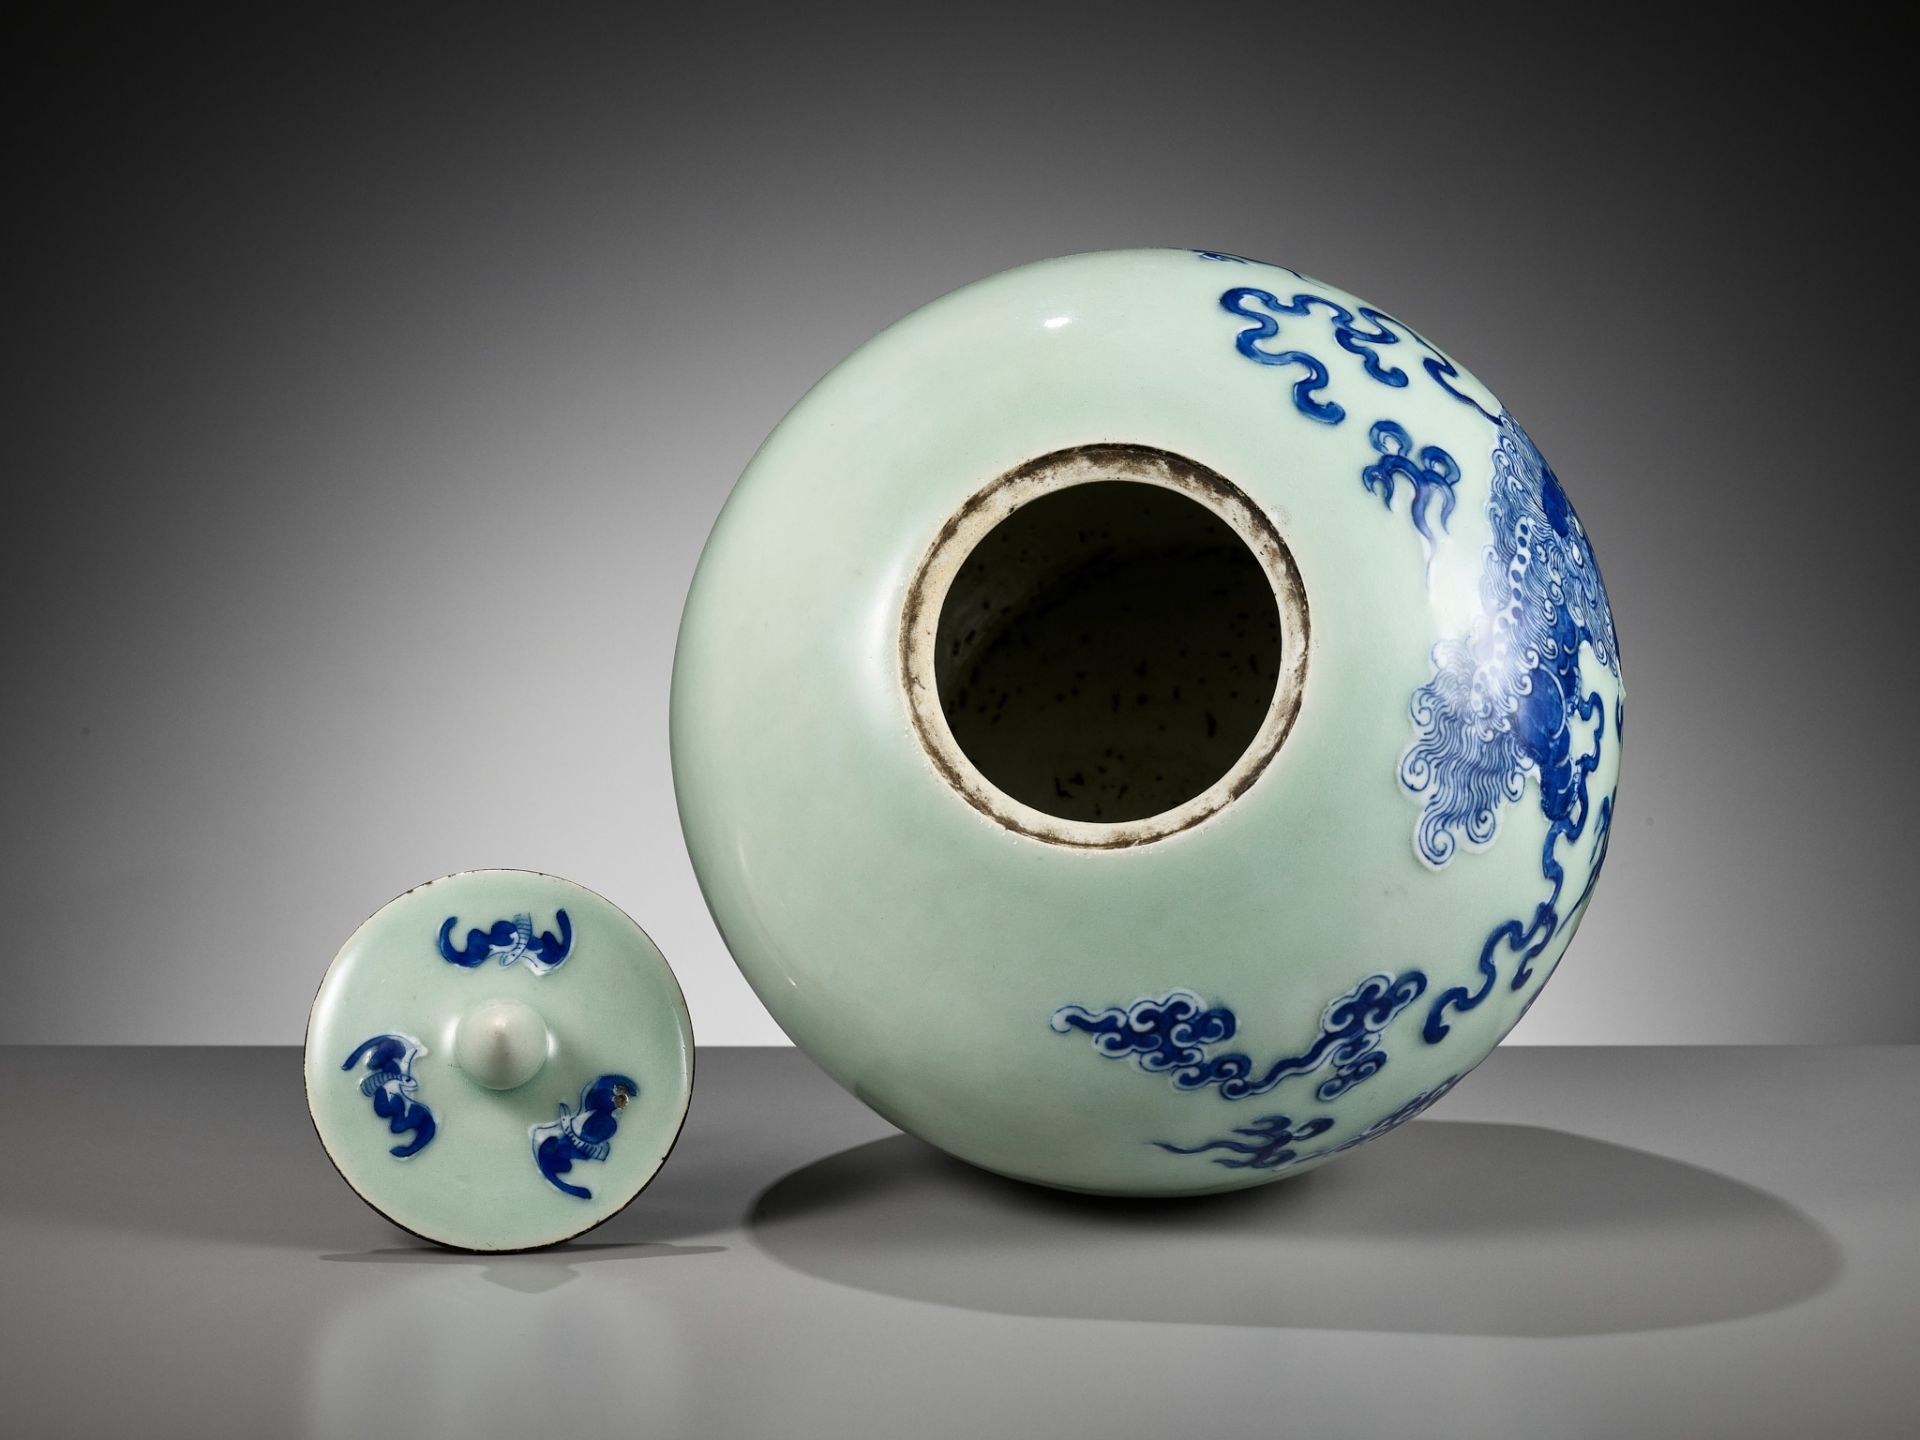 A CELADON-GROUND AND UNDERGLAZE-BLUE JAR AND COVER, CHINA, 19TH - EARLY 20TH CENTURY - Image 8 of 10